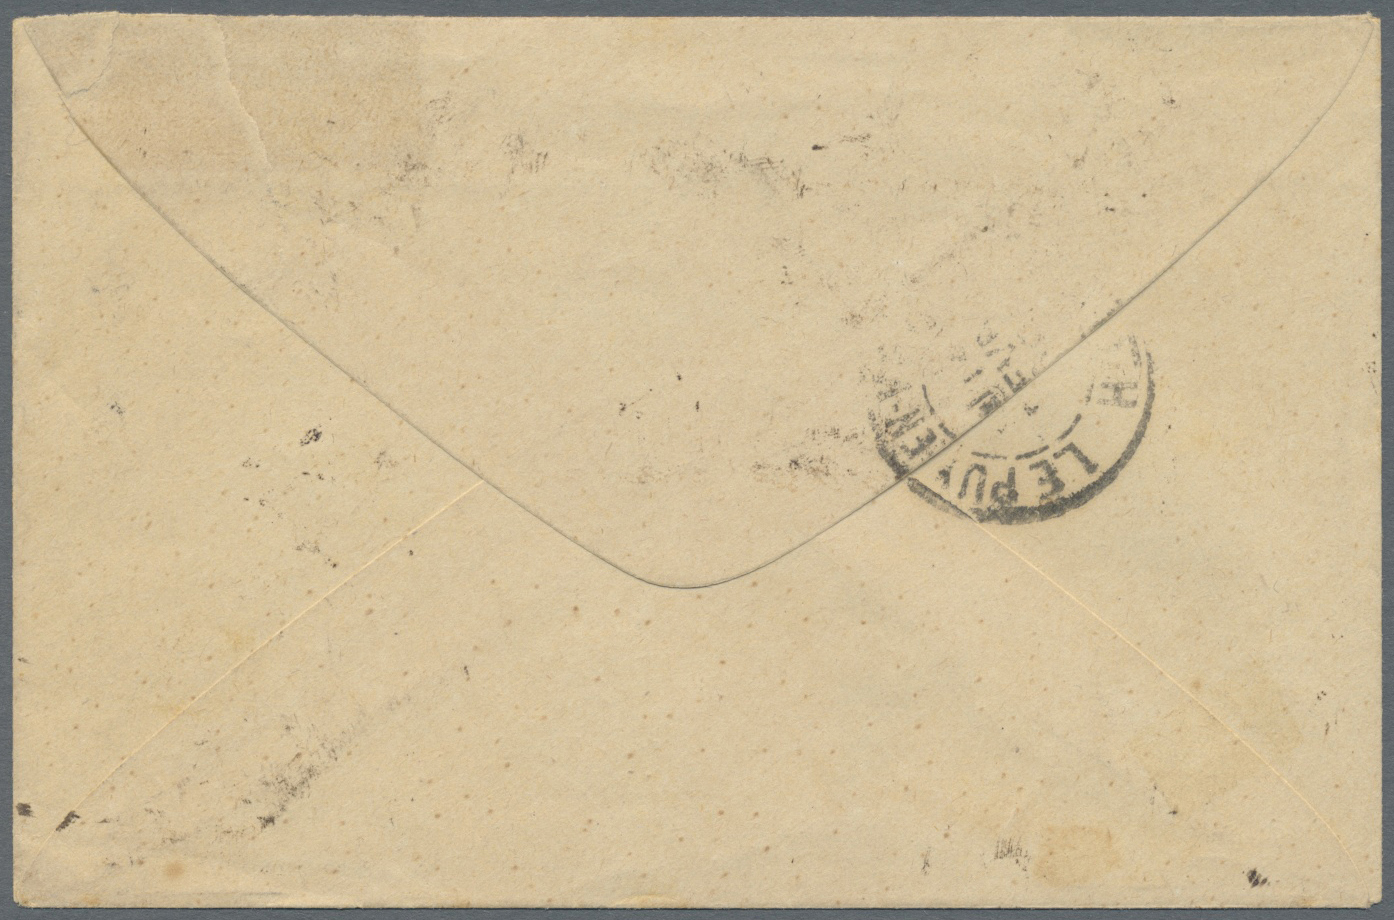 GA Kambodscha: 1898. French Indo-China Postal Stationery Envelope 5c Green Cancelled By Pnompenh/Cambodge Double Ring '6 - Cambodge